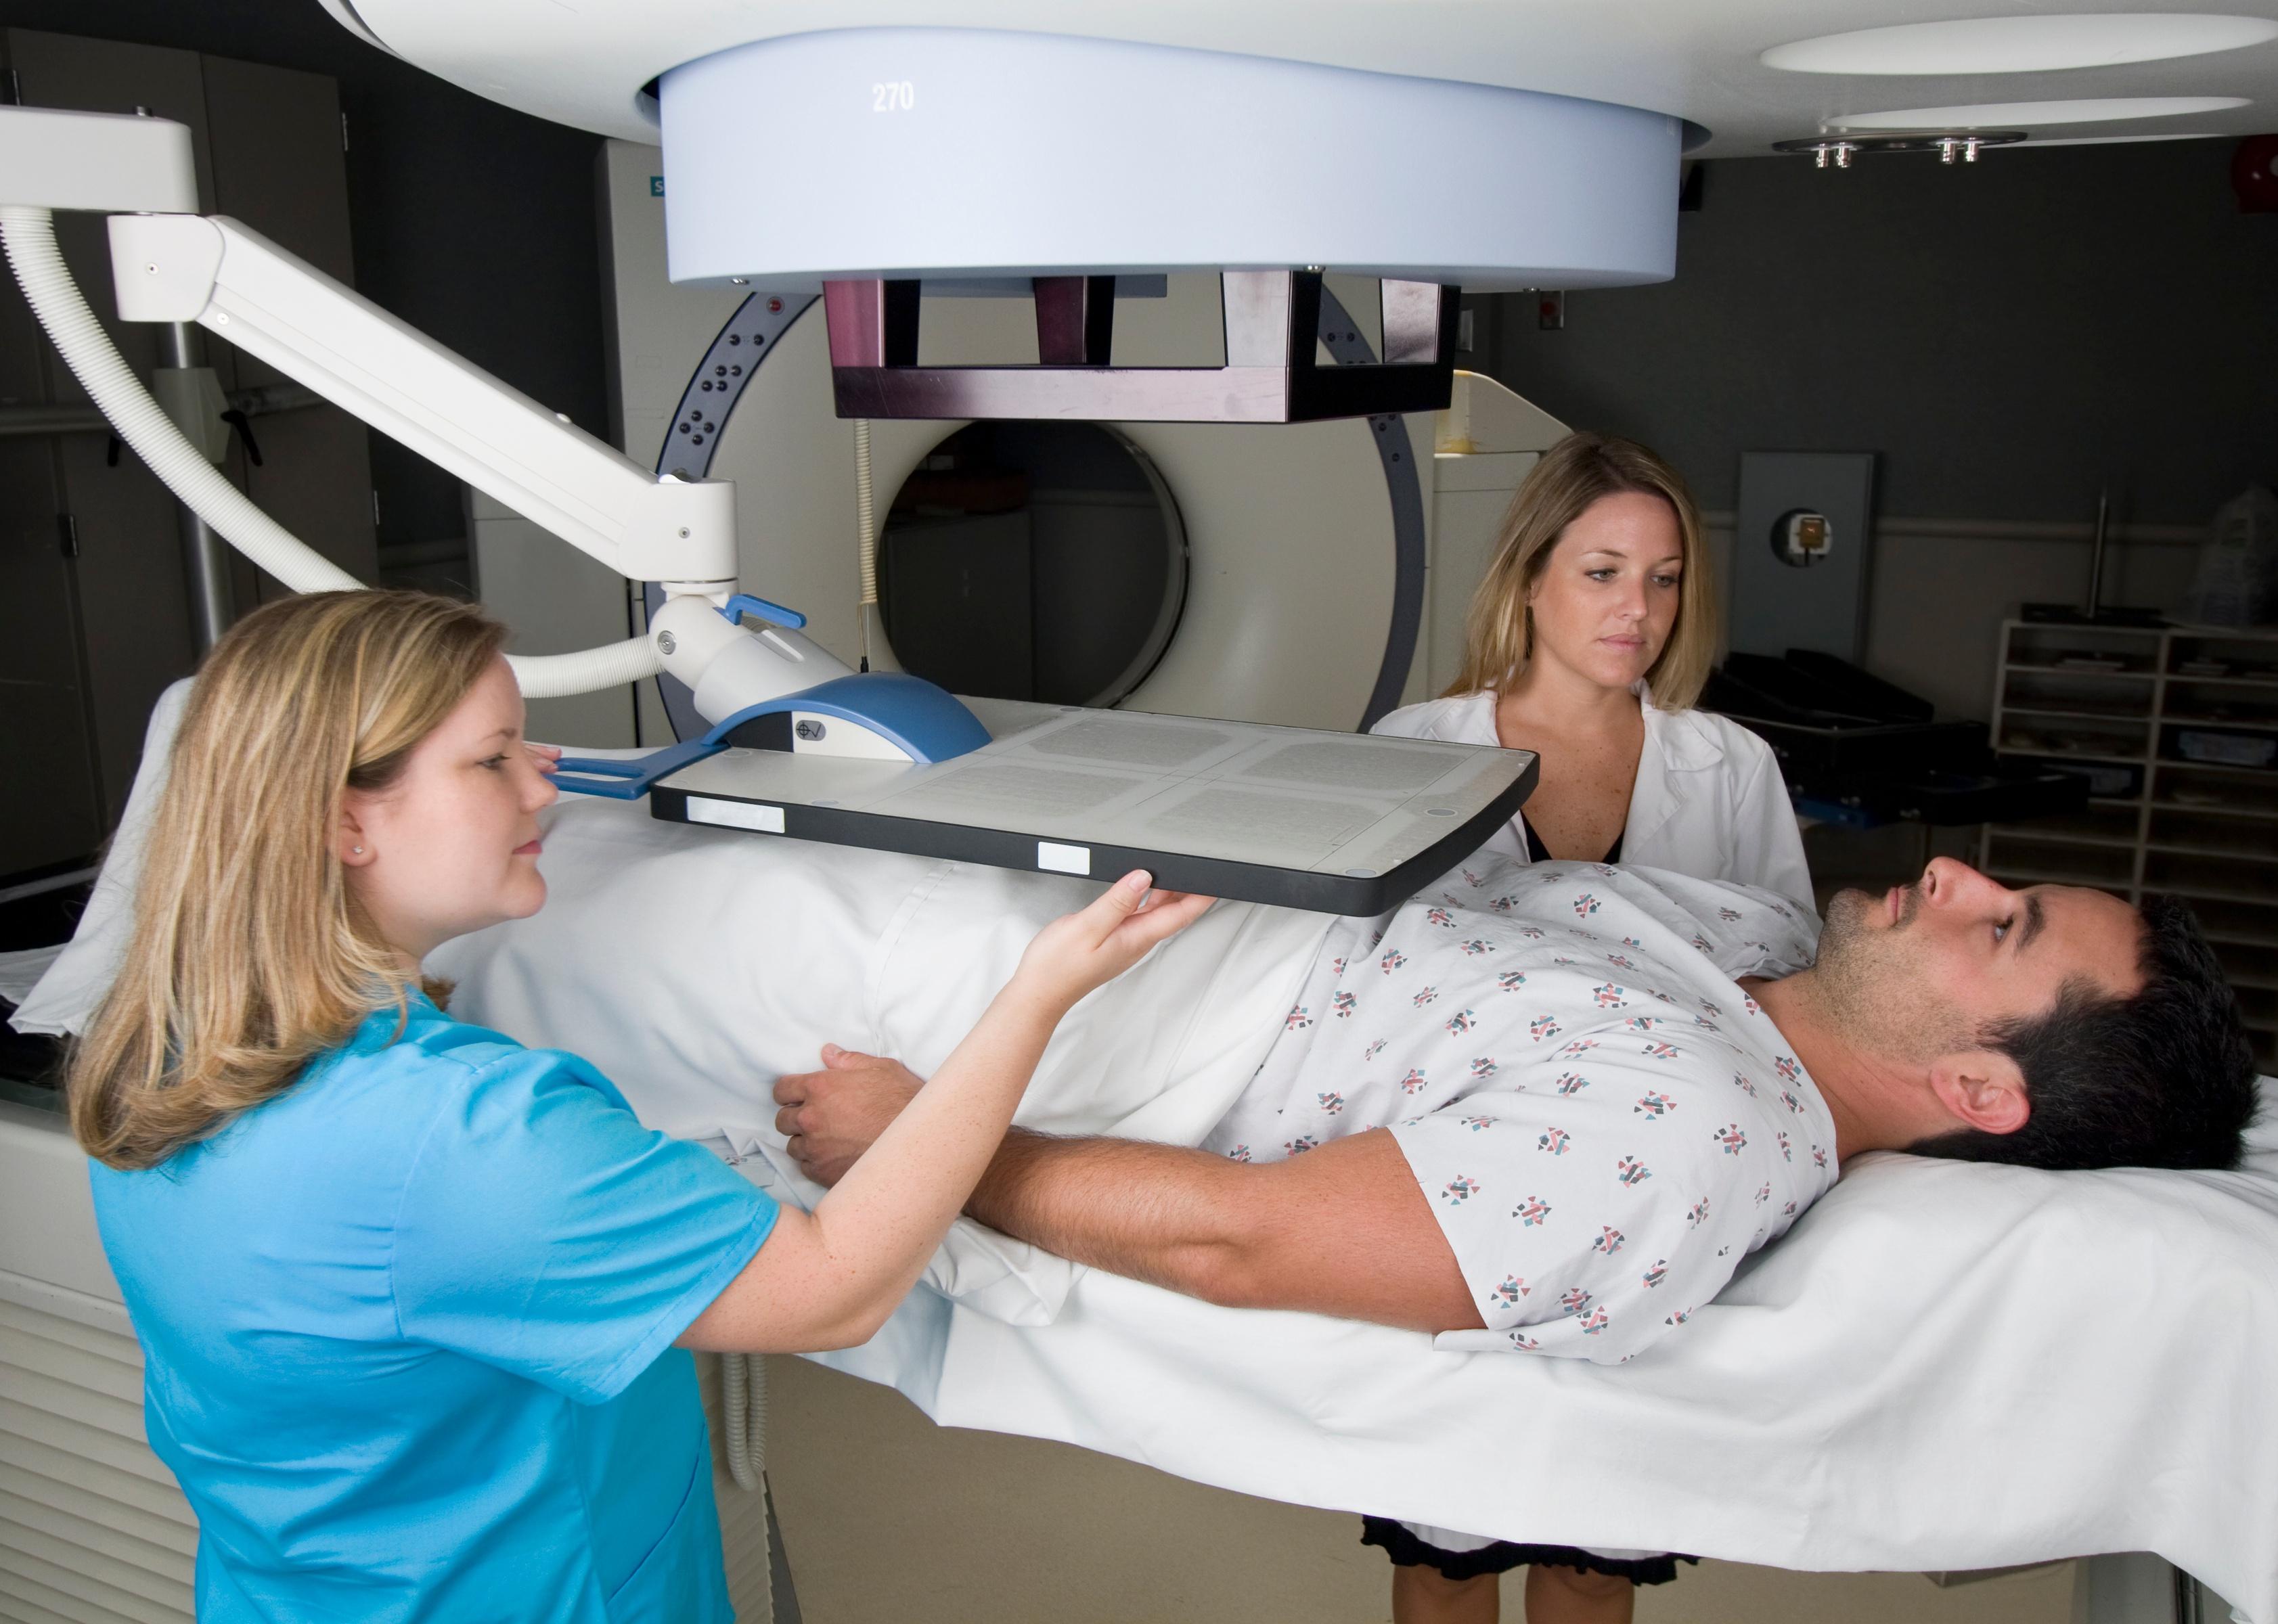 A dosimetrist gives radiation treatment to a patient.